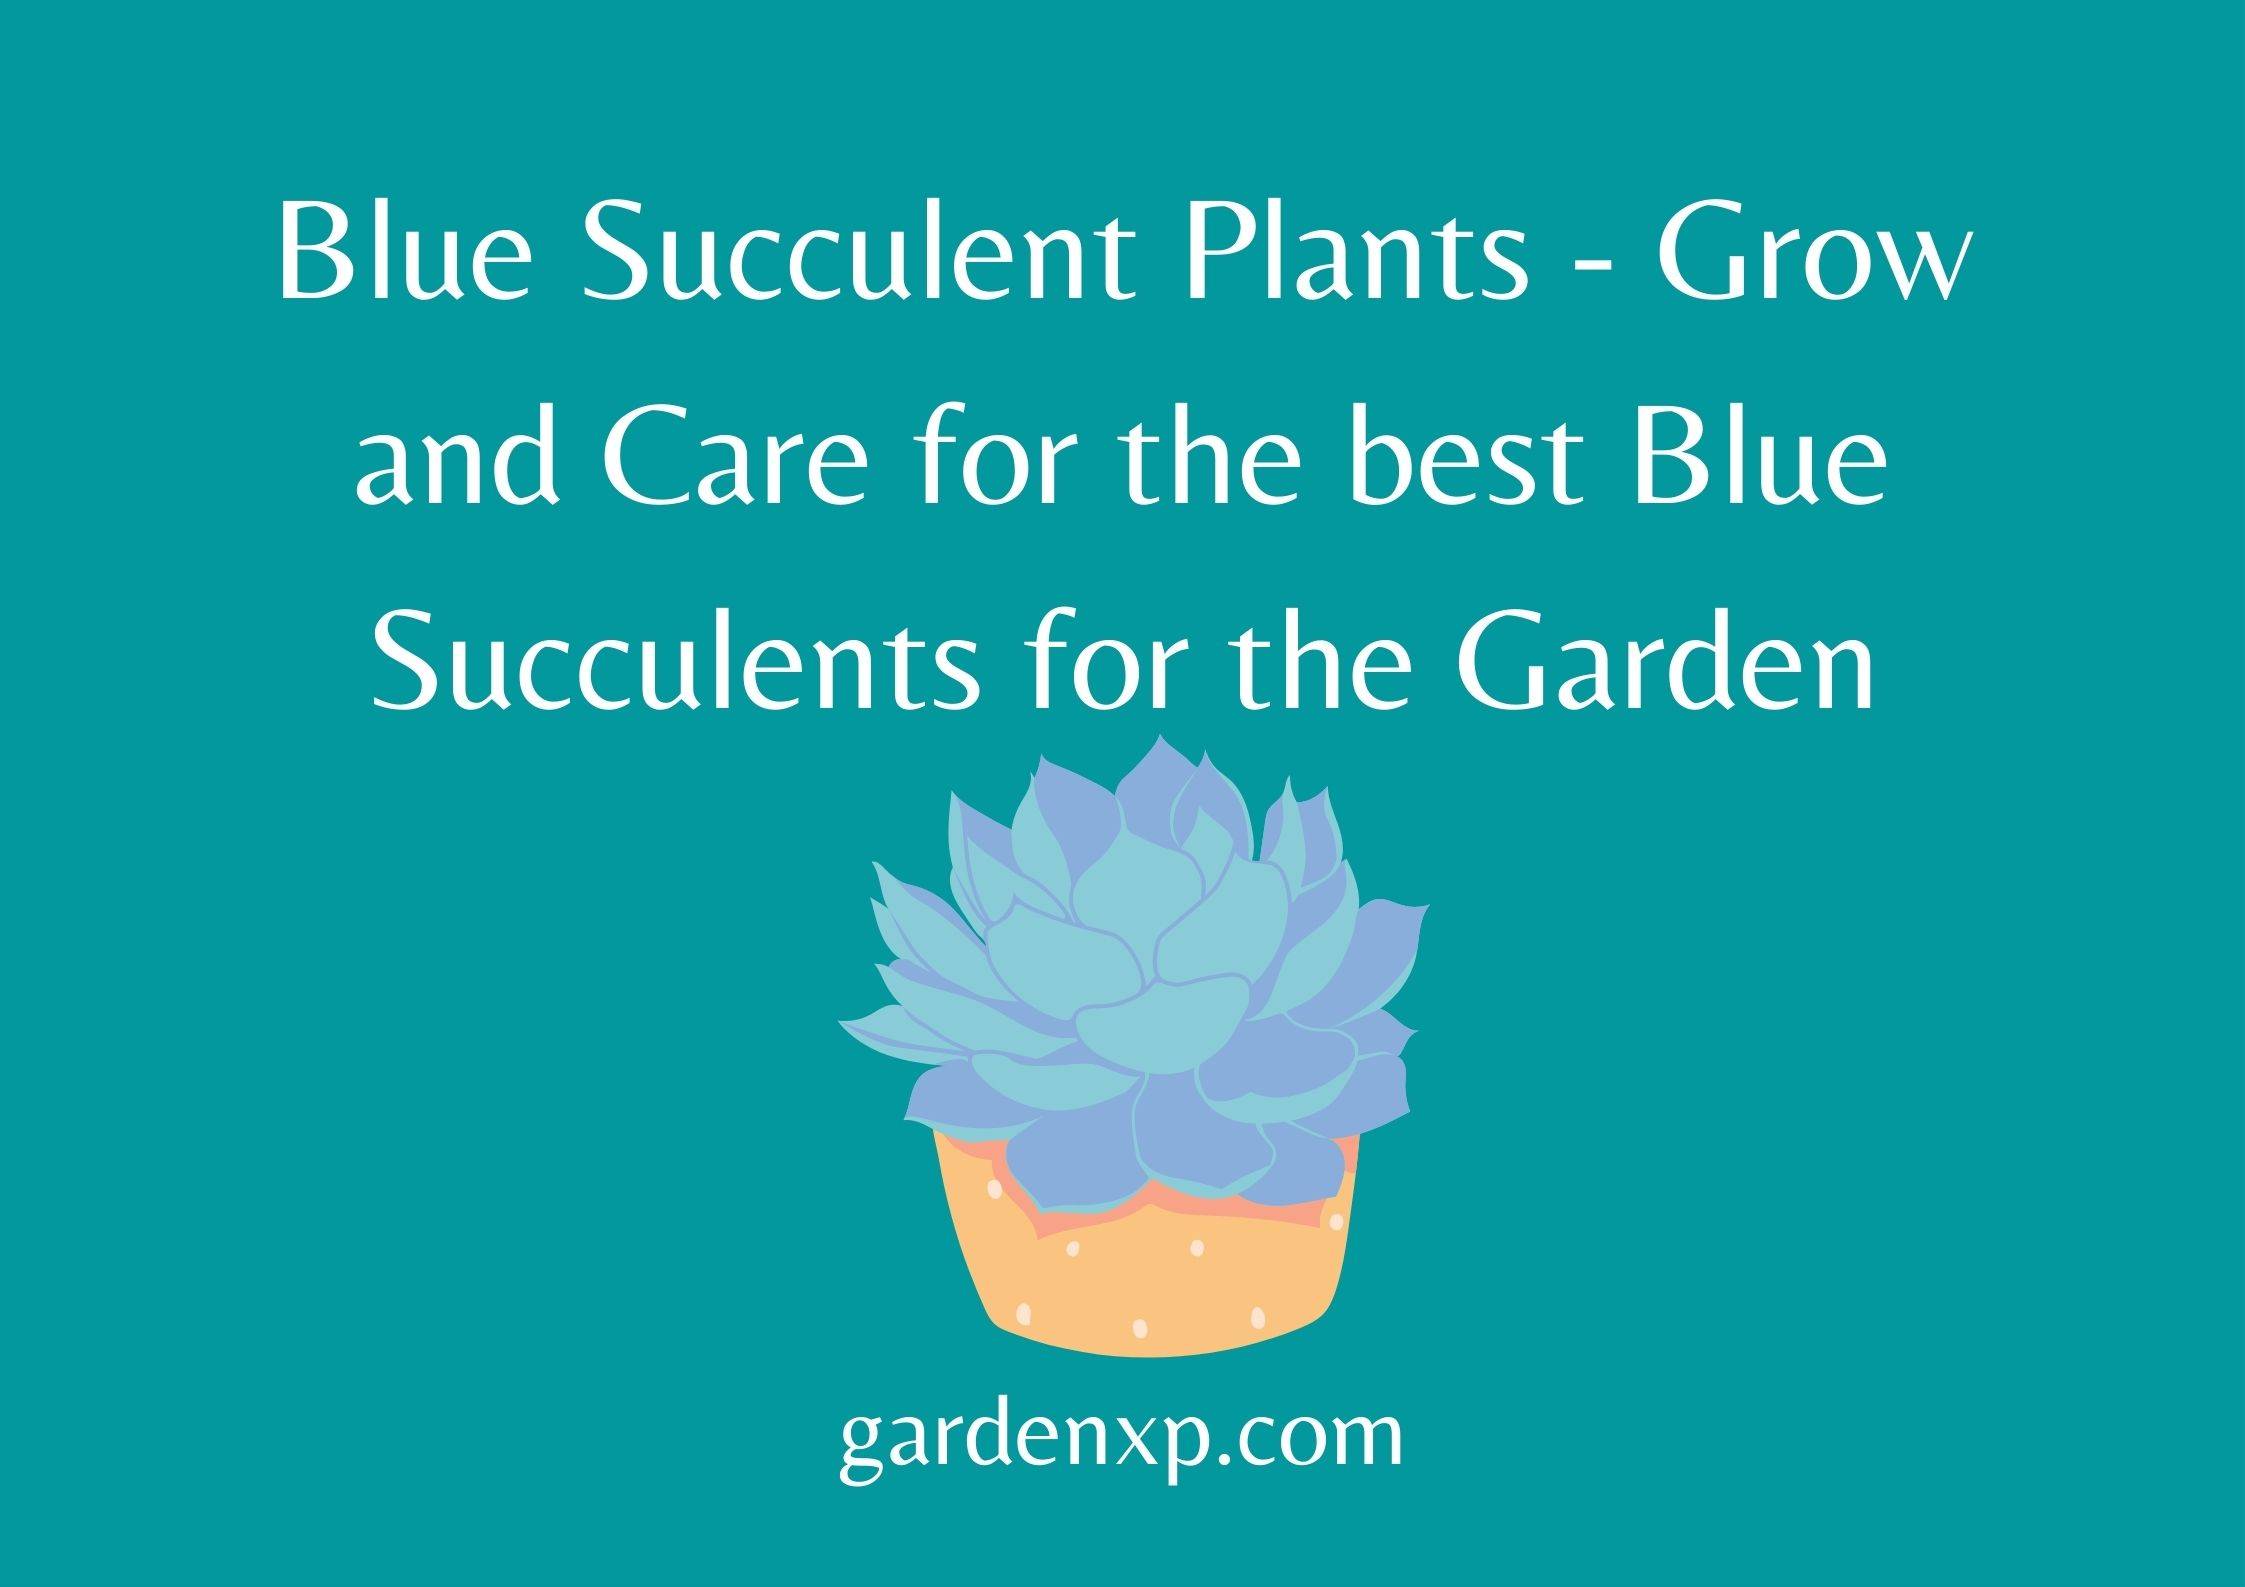 Blue Succulent Plants - Grow and Care for the best Blue Succulents for the Garden